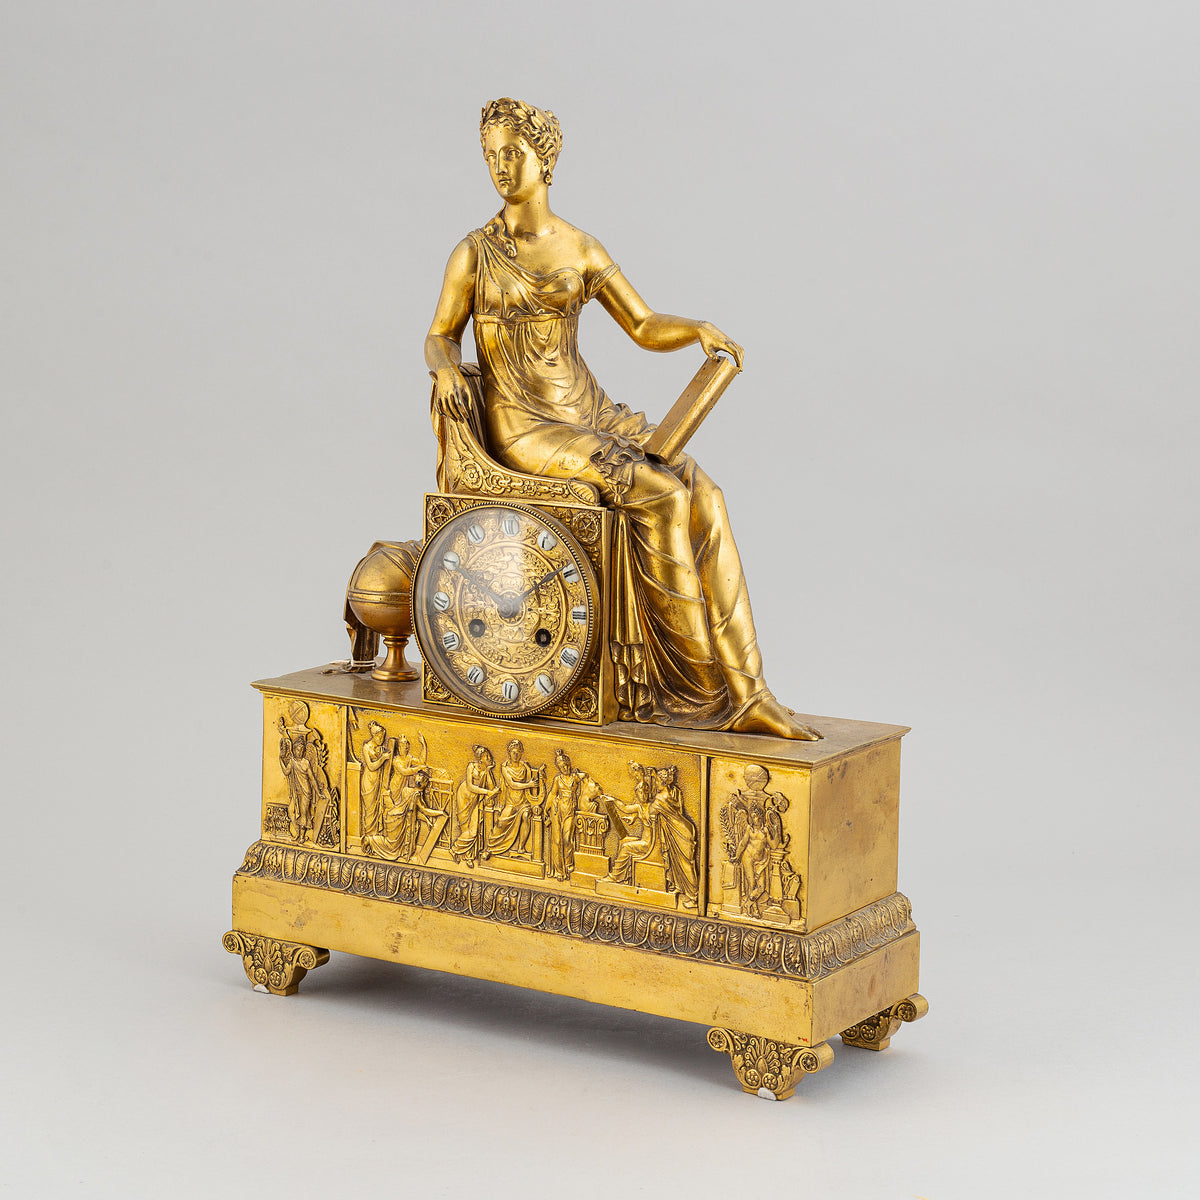 Awesome 19C antique French gilded bronze clock greek goddess of truth Aletheia